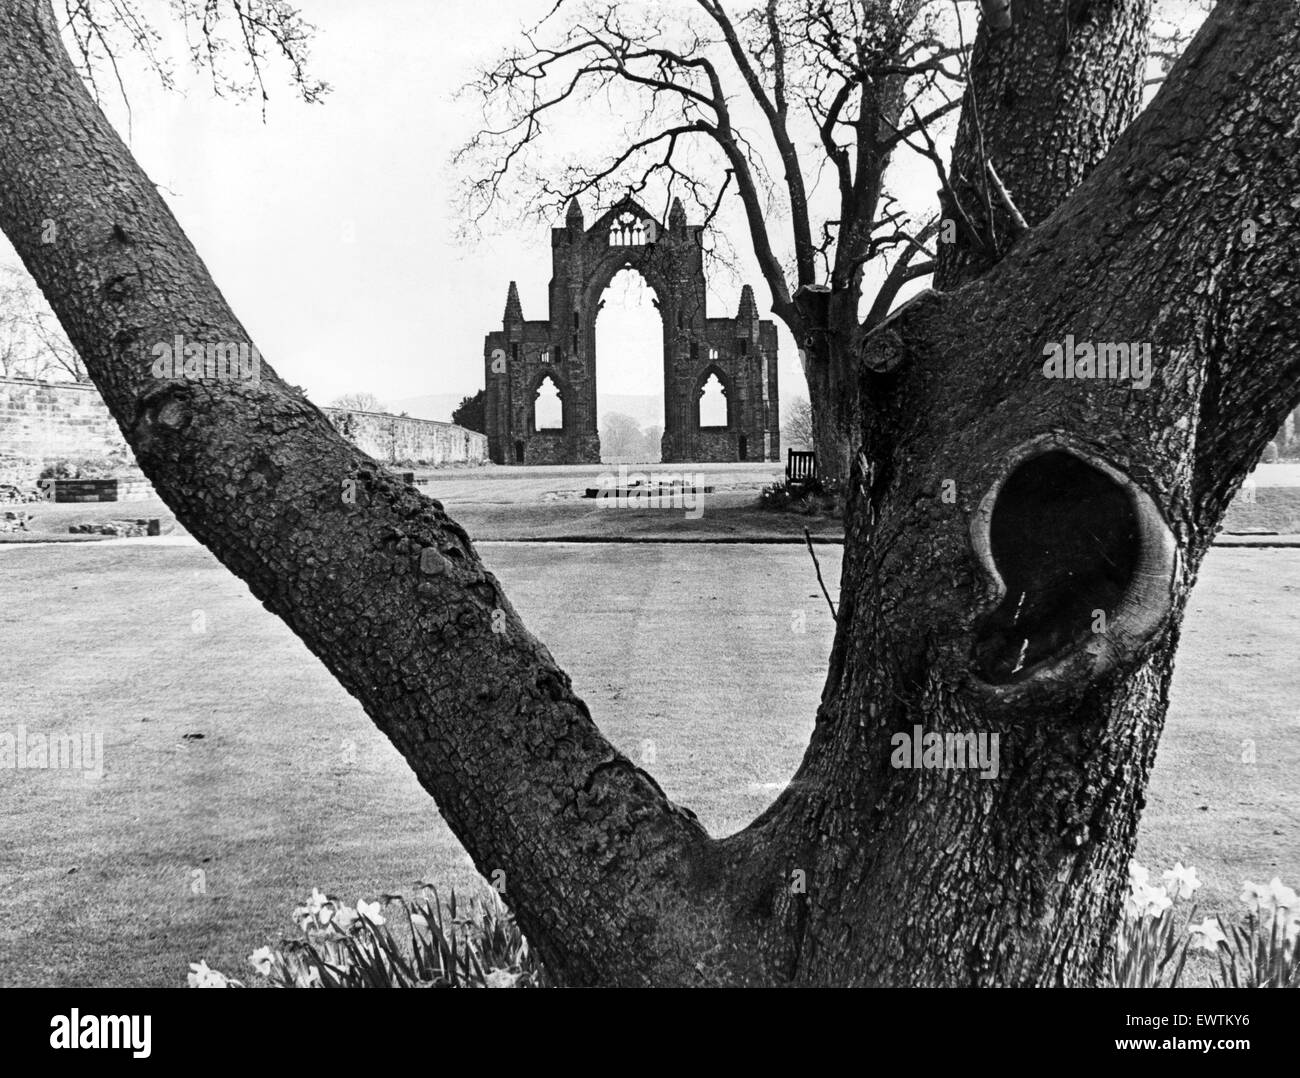 The 98 foot high ruins of the Augustinian Priory Church at Guisborough, North Yorkshire. 25th April 1975. Stock Photo